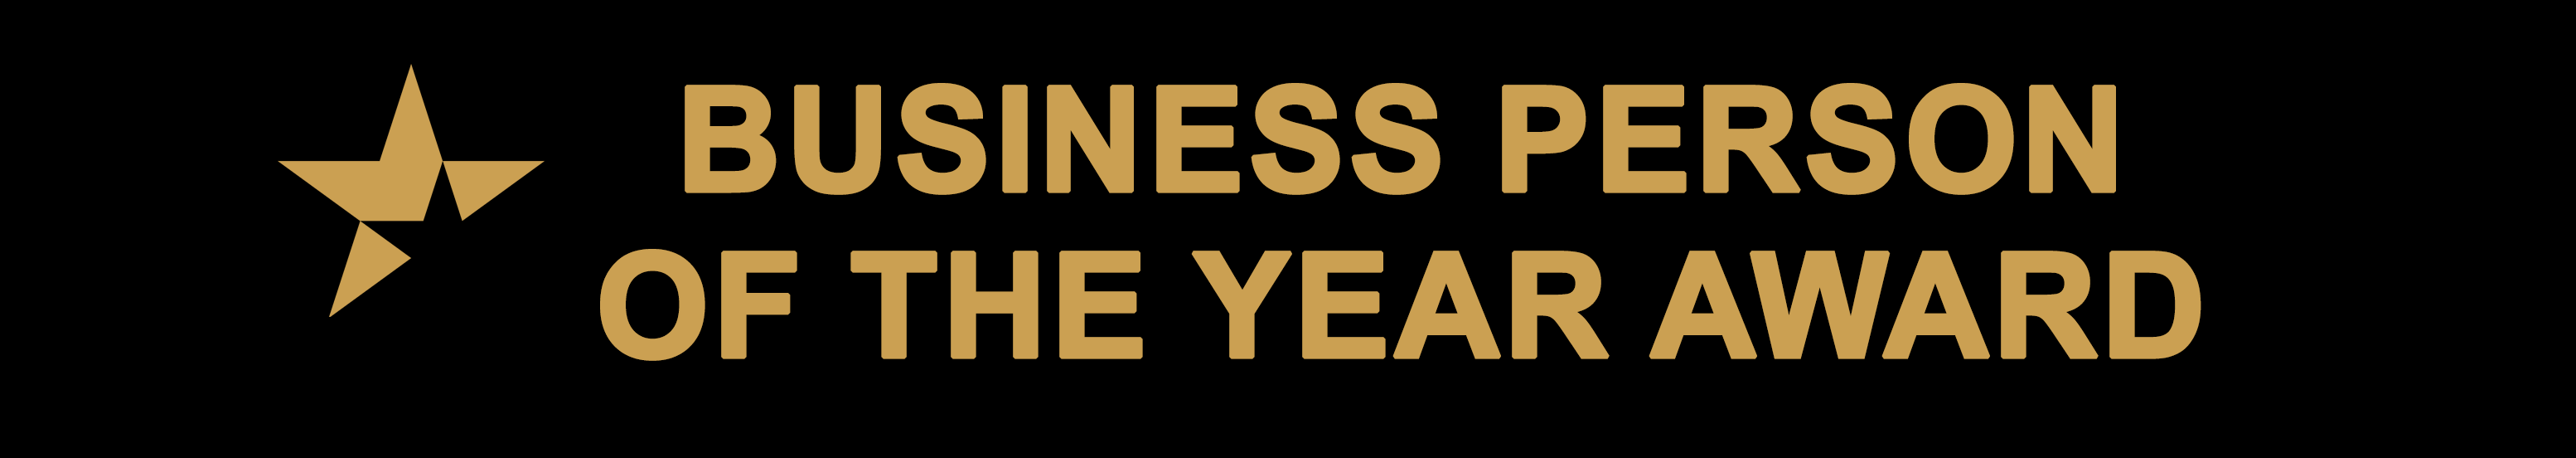 business person of the year award name only